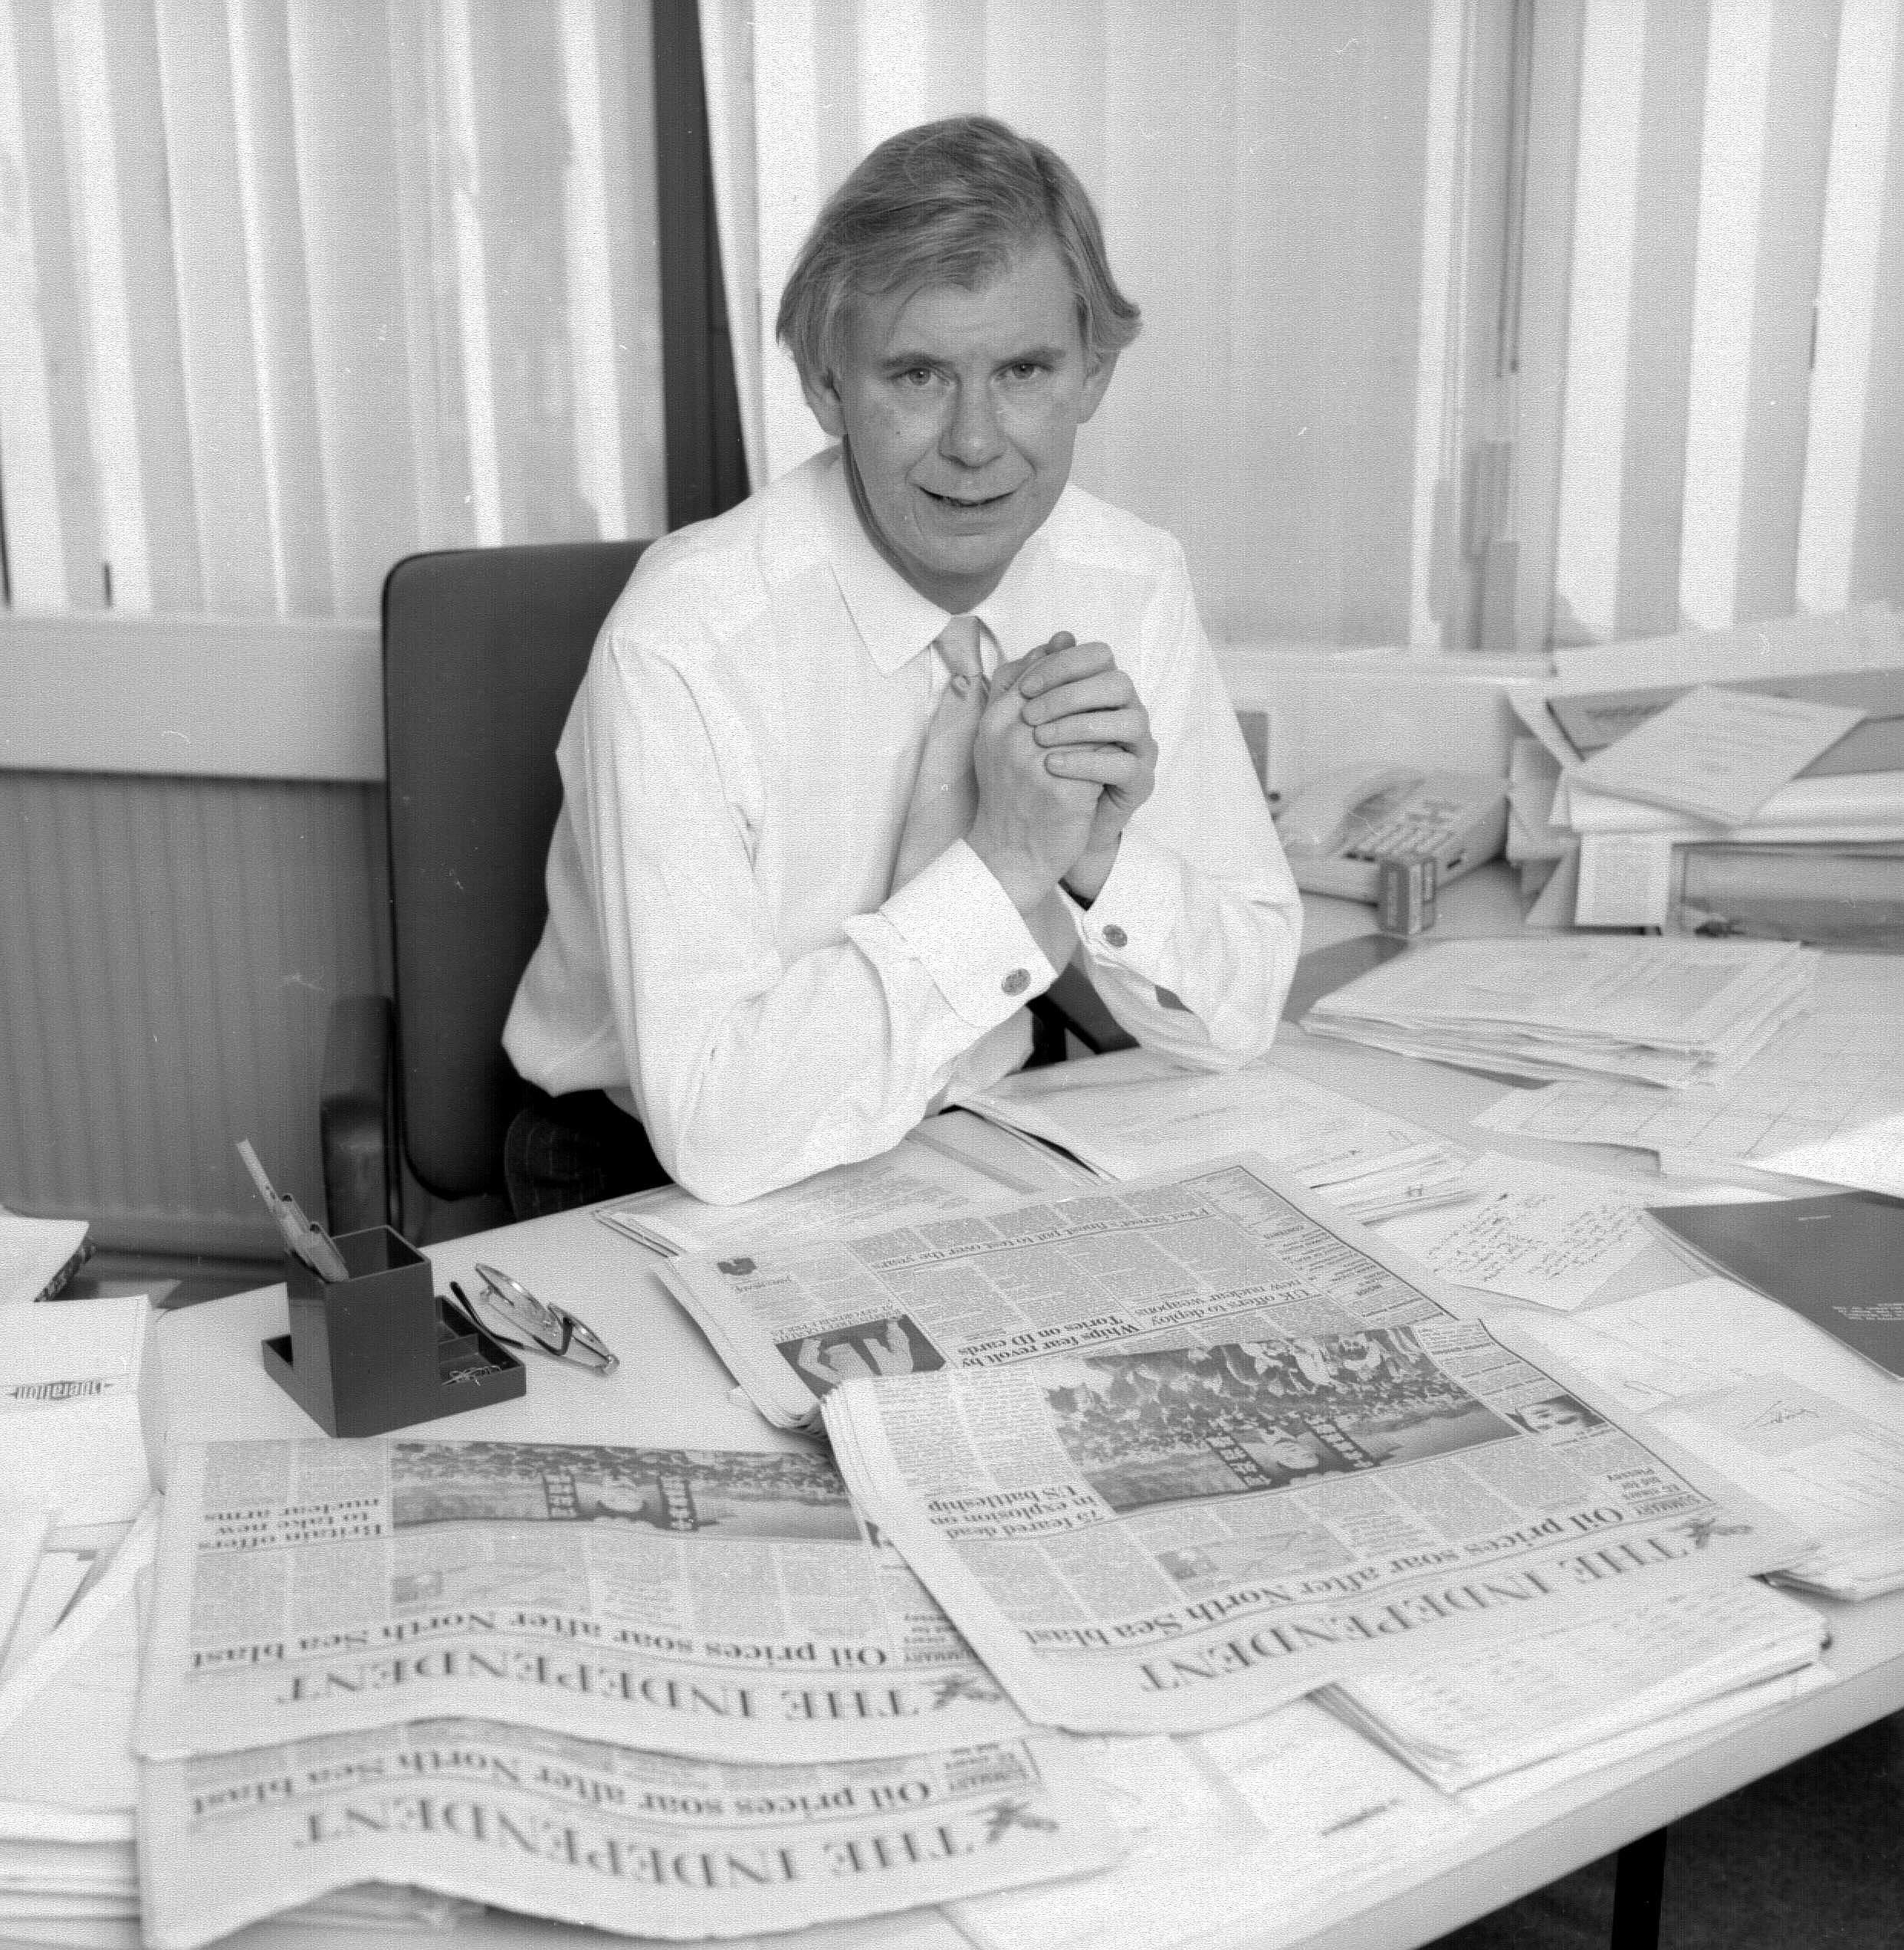 Andreas Whittam Smith, founding editor of The Independent, which was launched in 1986